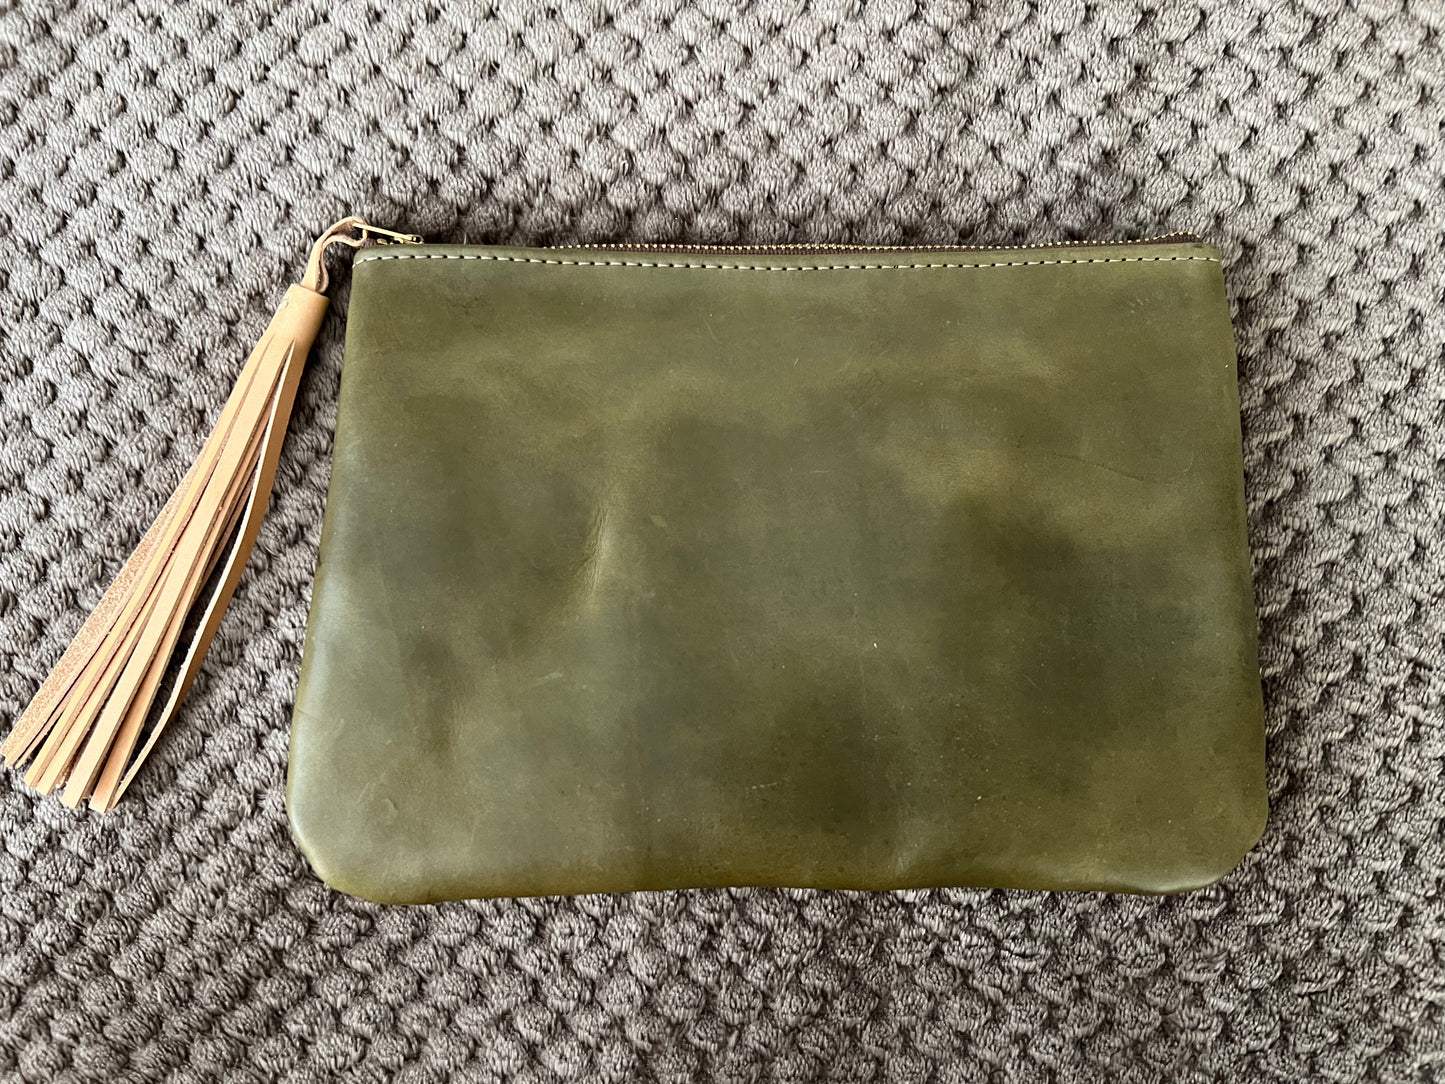 Woven Leather Clutch | Tasseled Green Leather Clutch | Oiled Leather Clutch